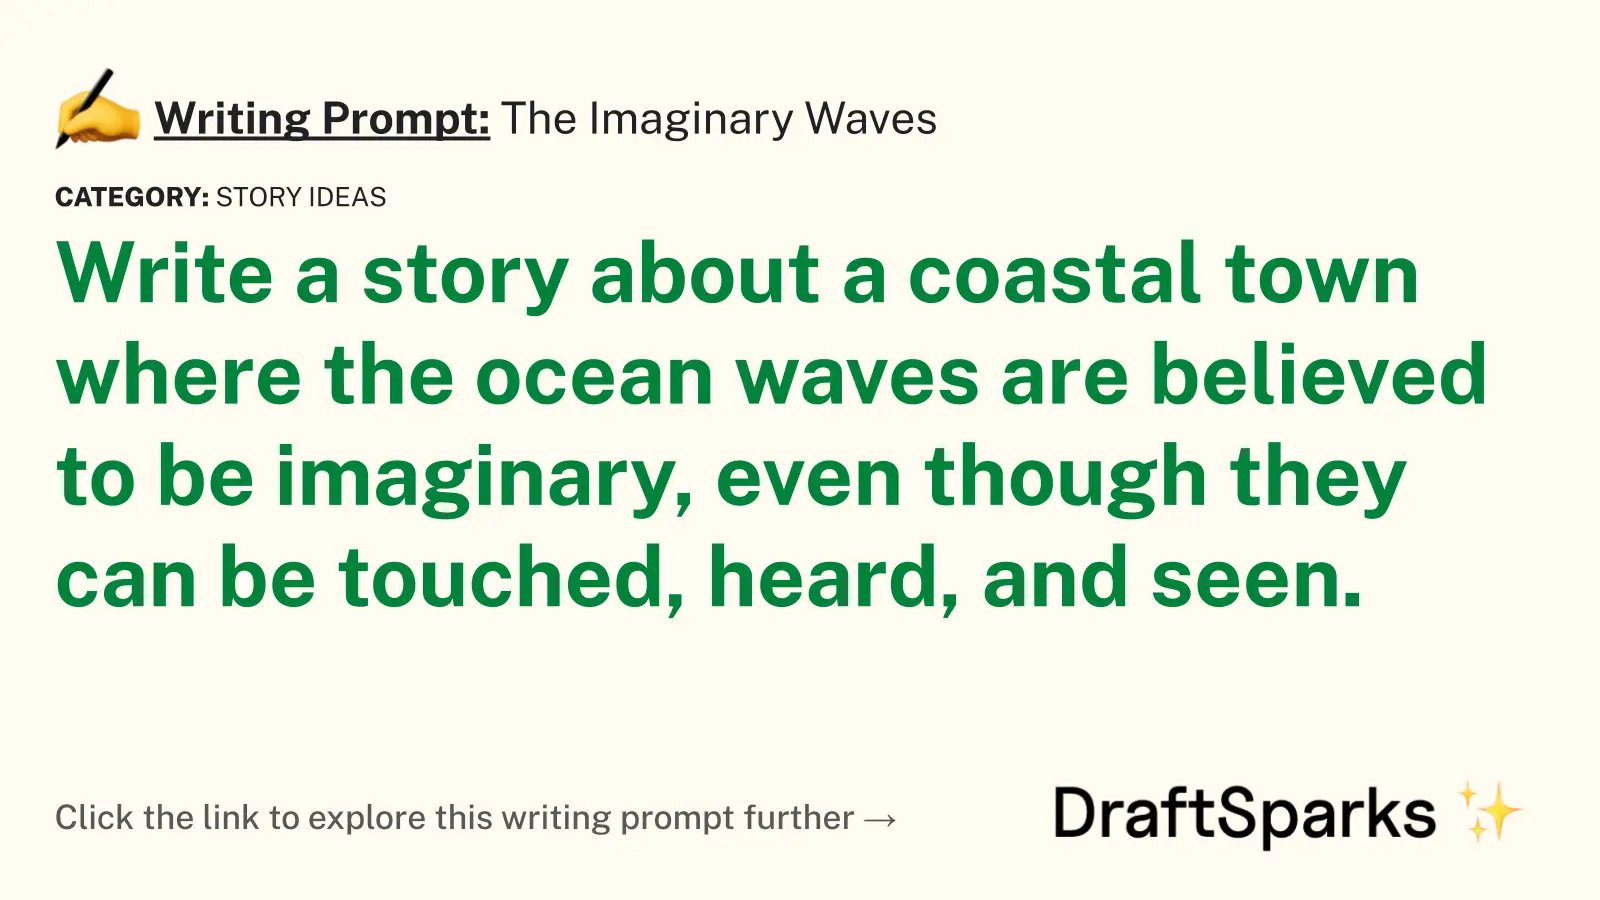 The Imaginary Waves